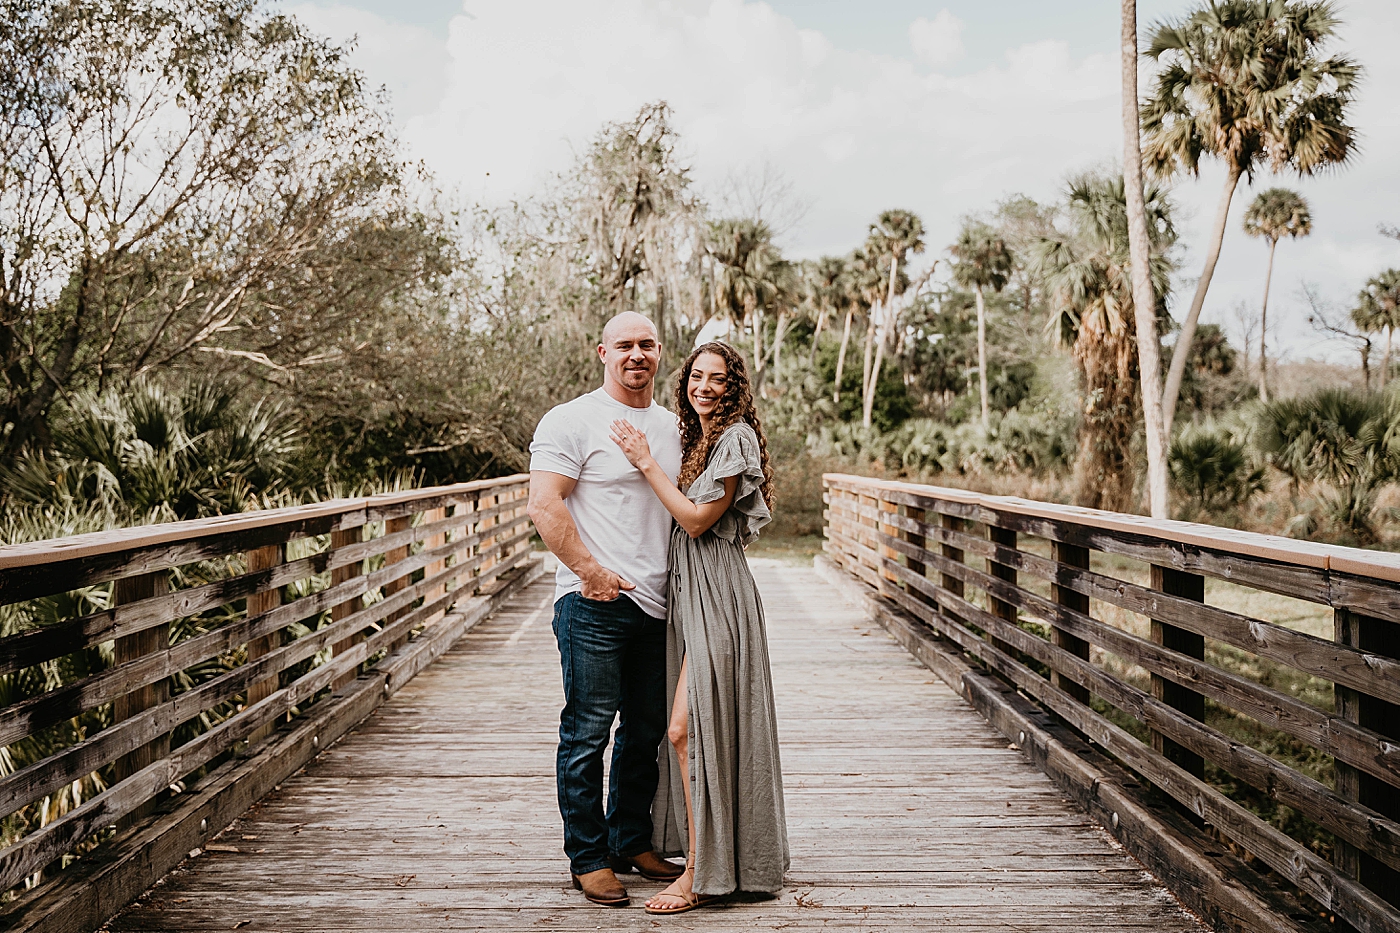 Couple holding each other on wooden bridge Romantic Riverbend Park Engagement Photography captured by South Florida Photographer Krystal Capone Photography